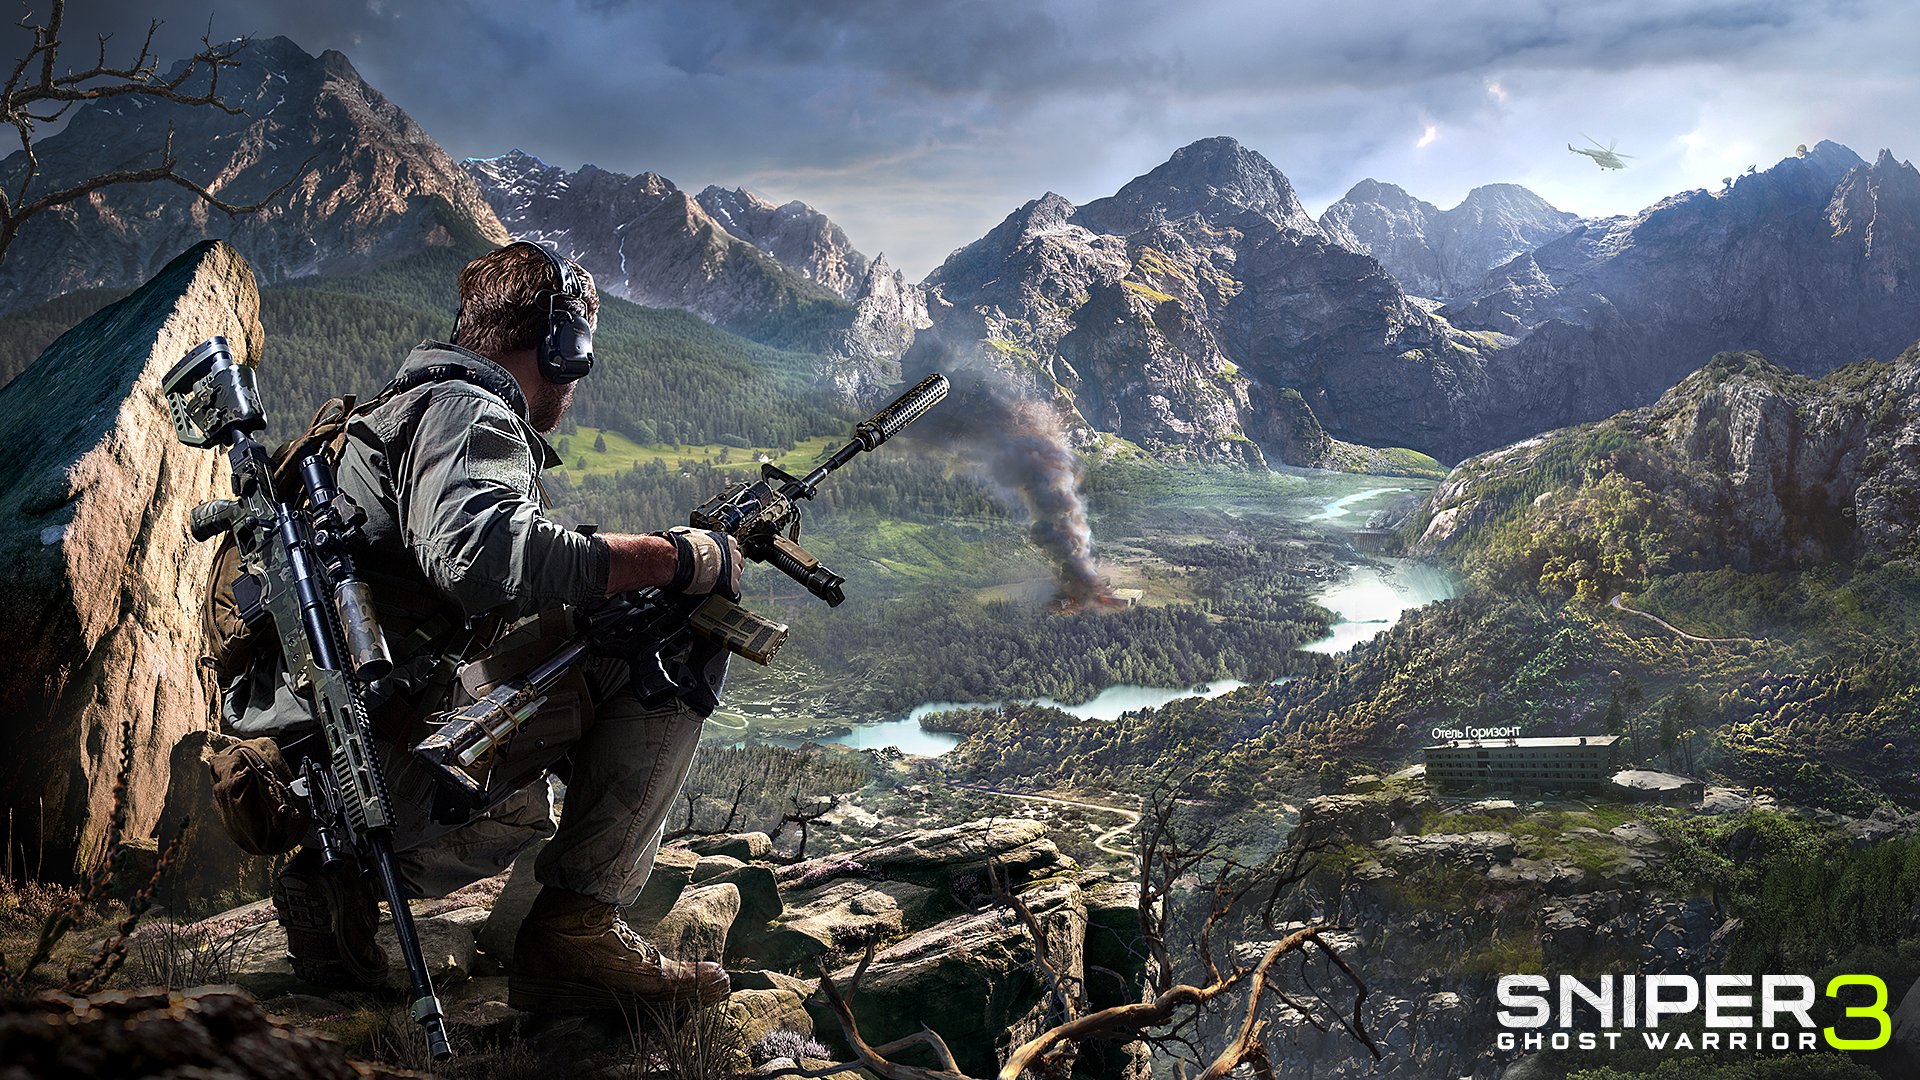 34 Sniper Ghost Warrior 3 HD Wallpapers Background Images